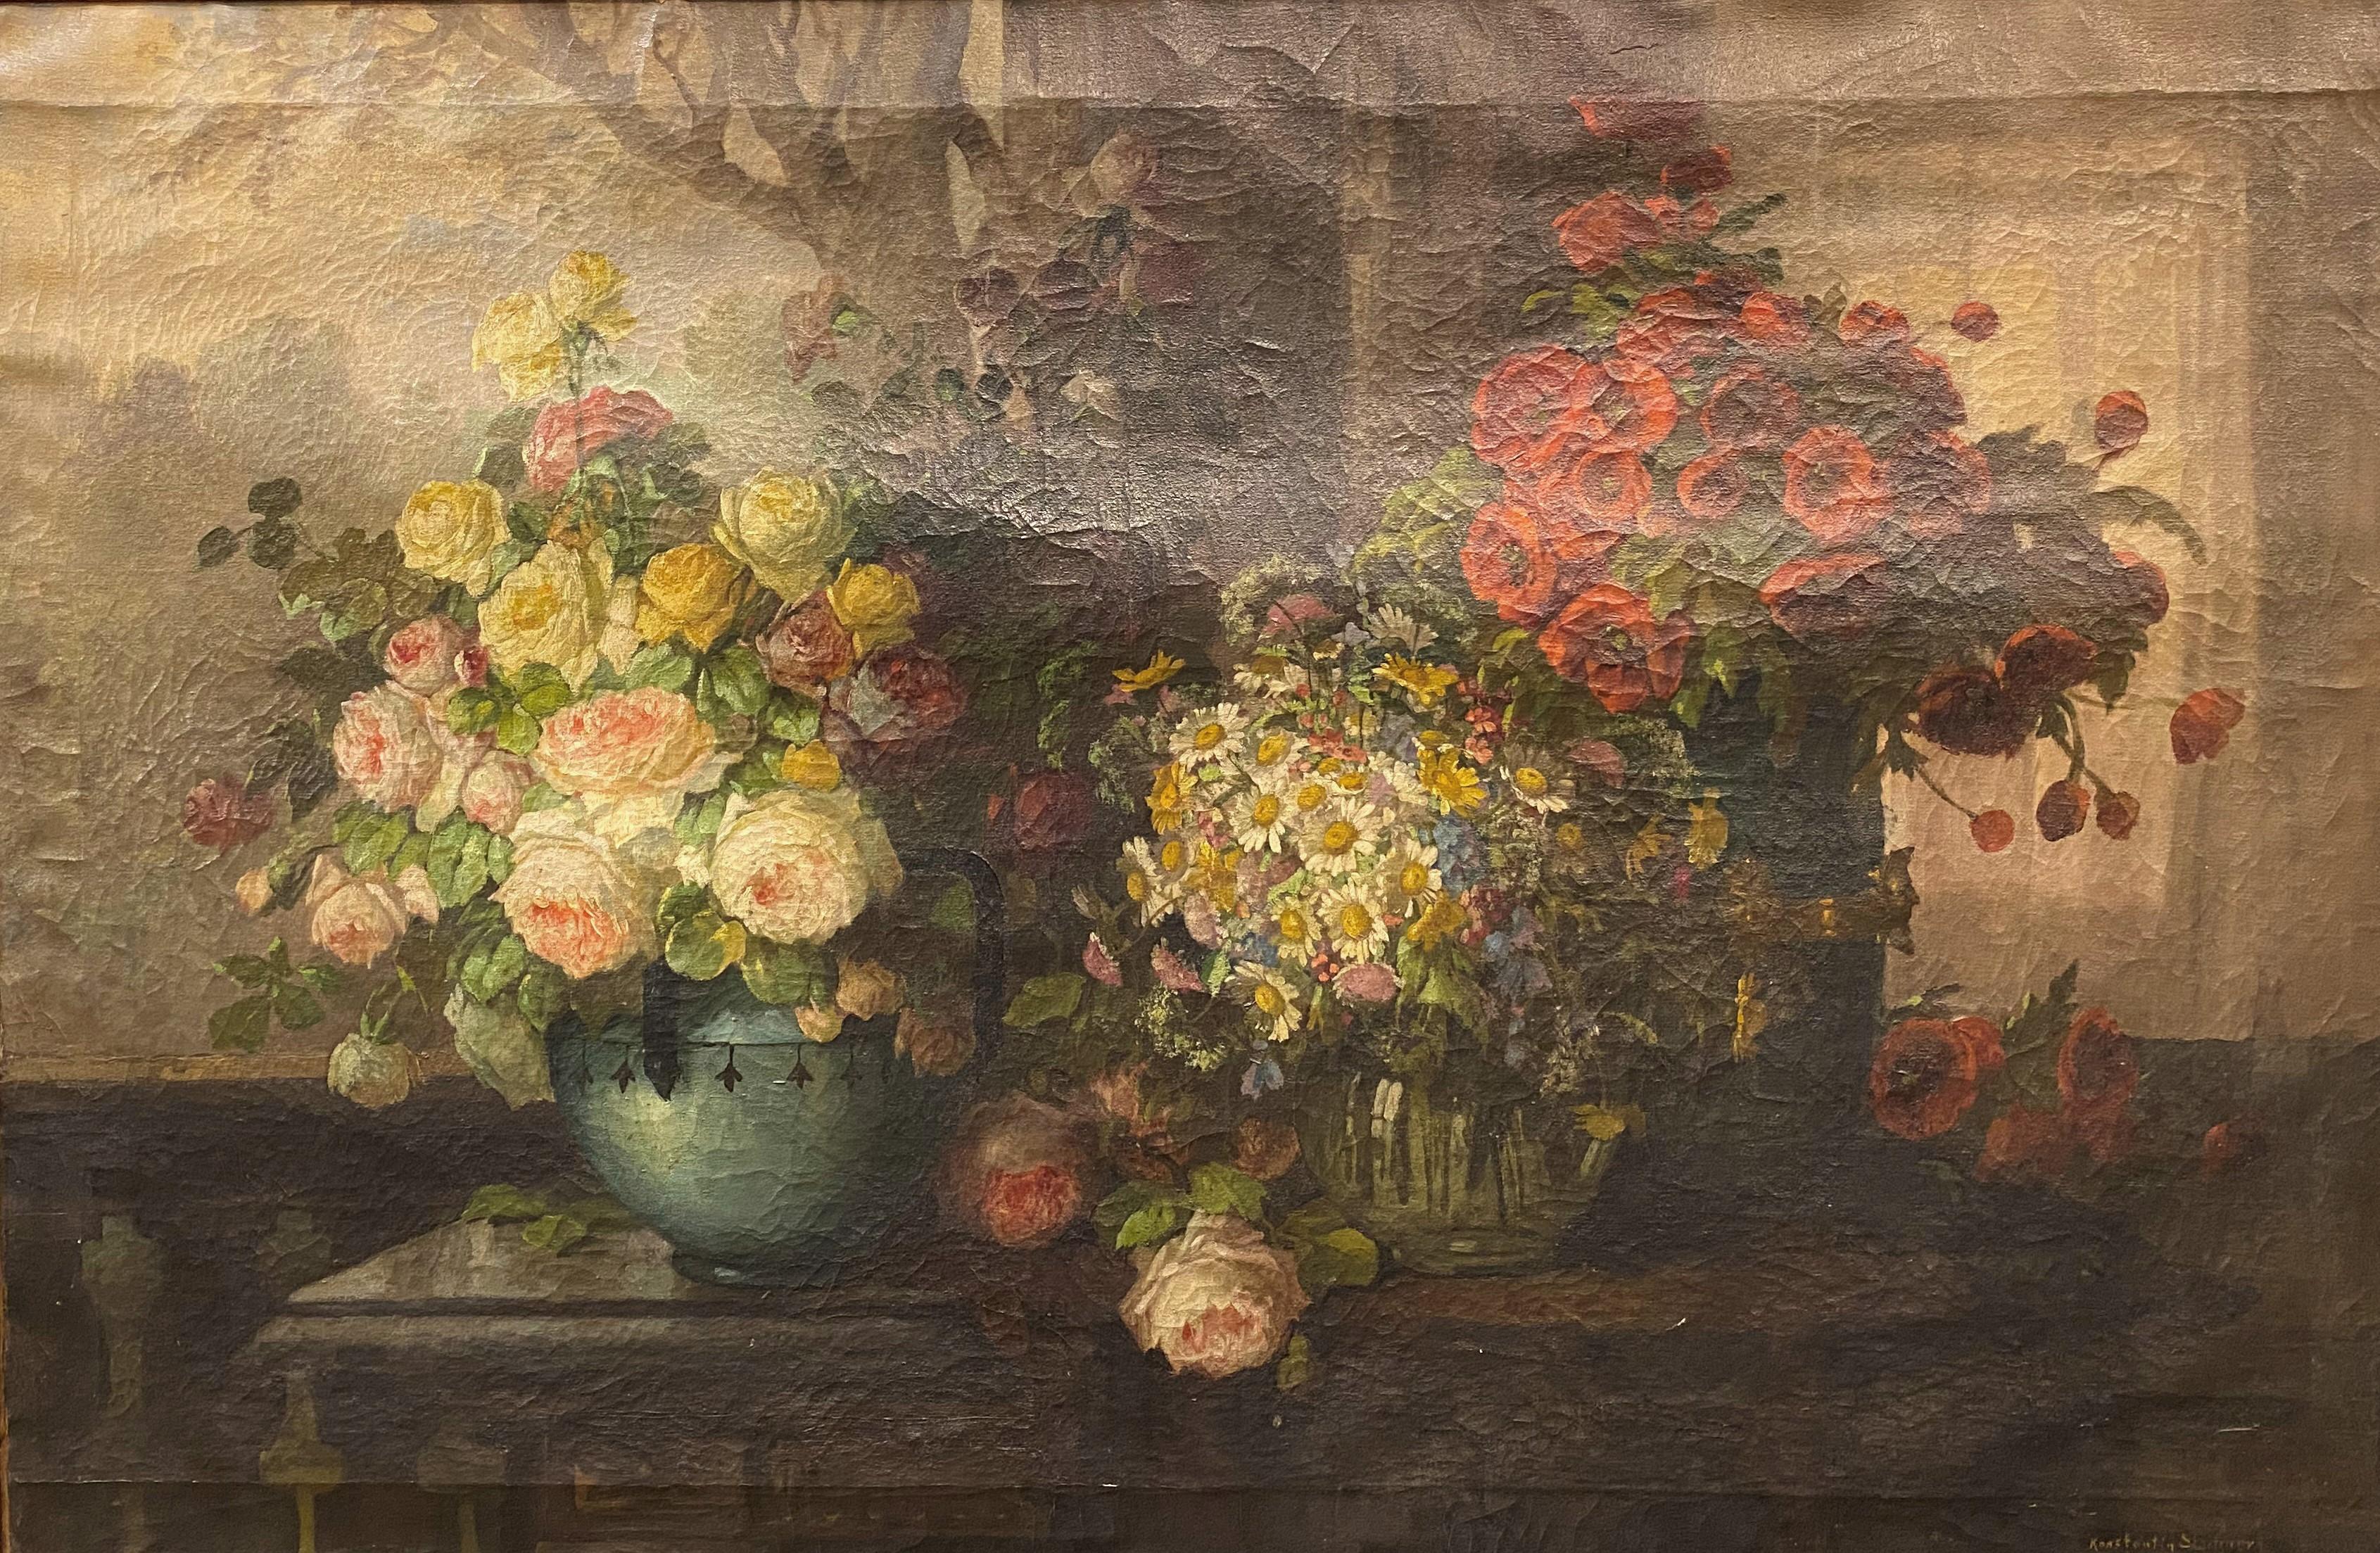 Still Life with Roses, Daisies, & Poppies - Painting by Konstantin Stoitzner